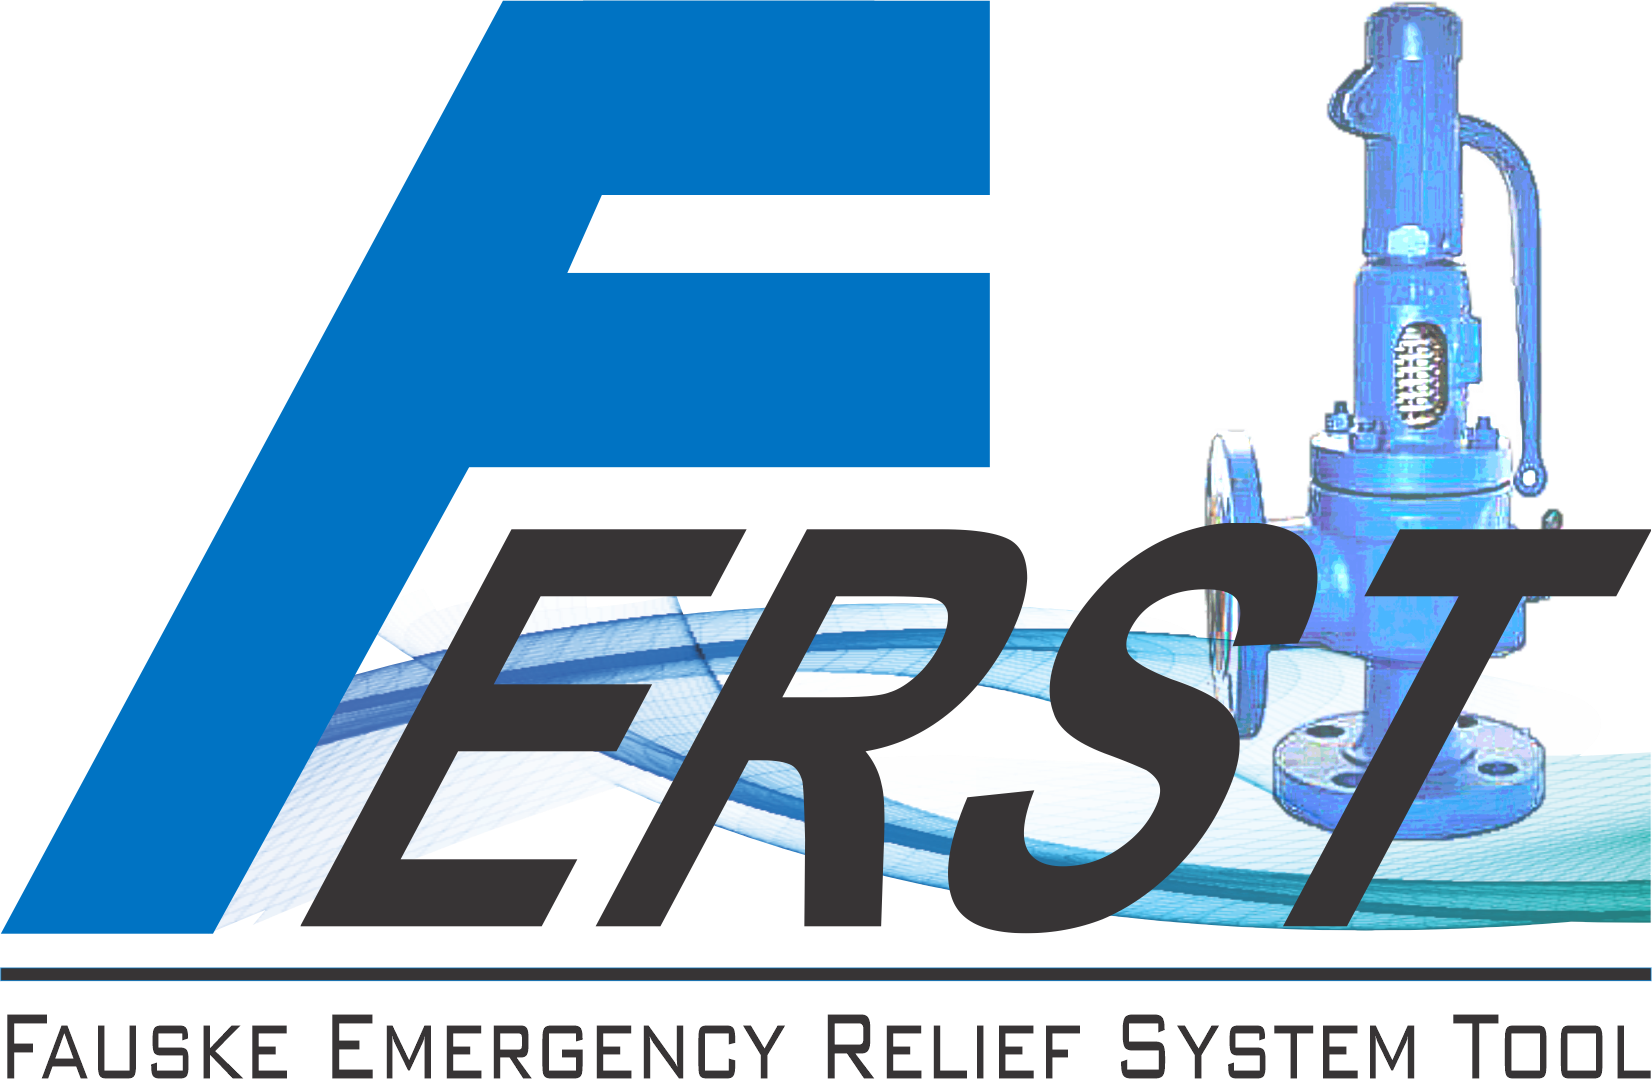 Emergency Relief System Tool Software by Fauske